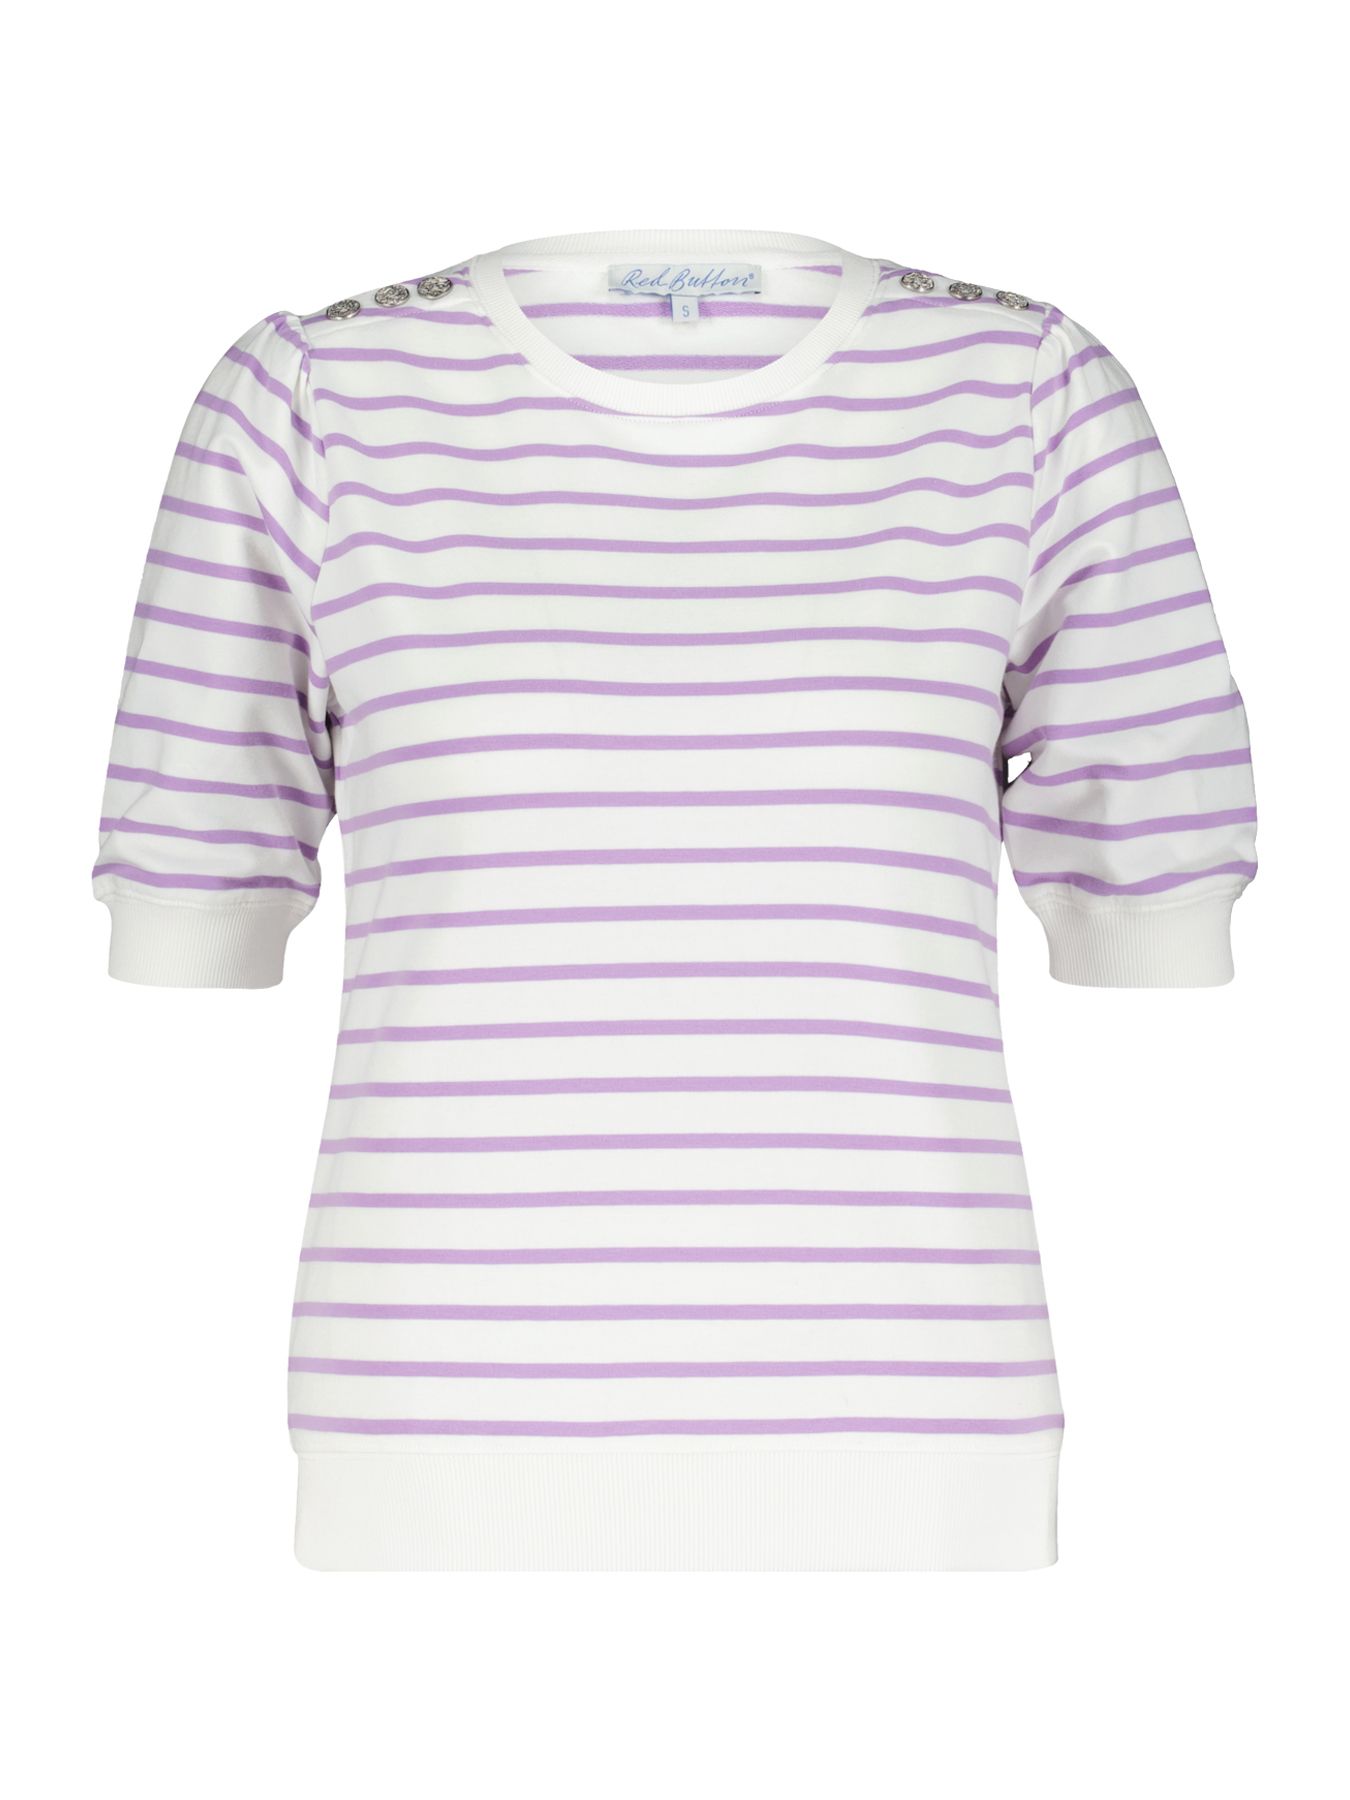 Red Button Terry stripe short sleeve lilac76 2900147171039